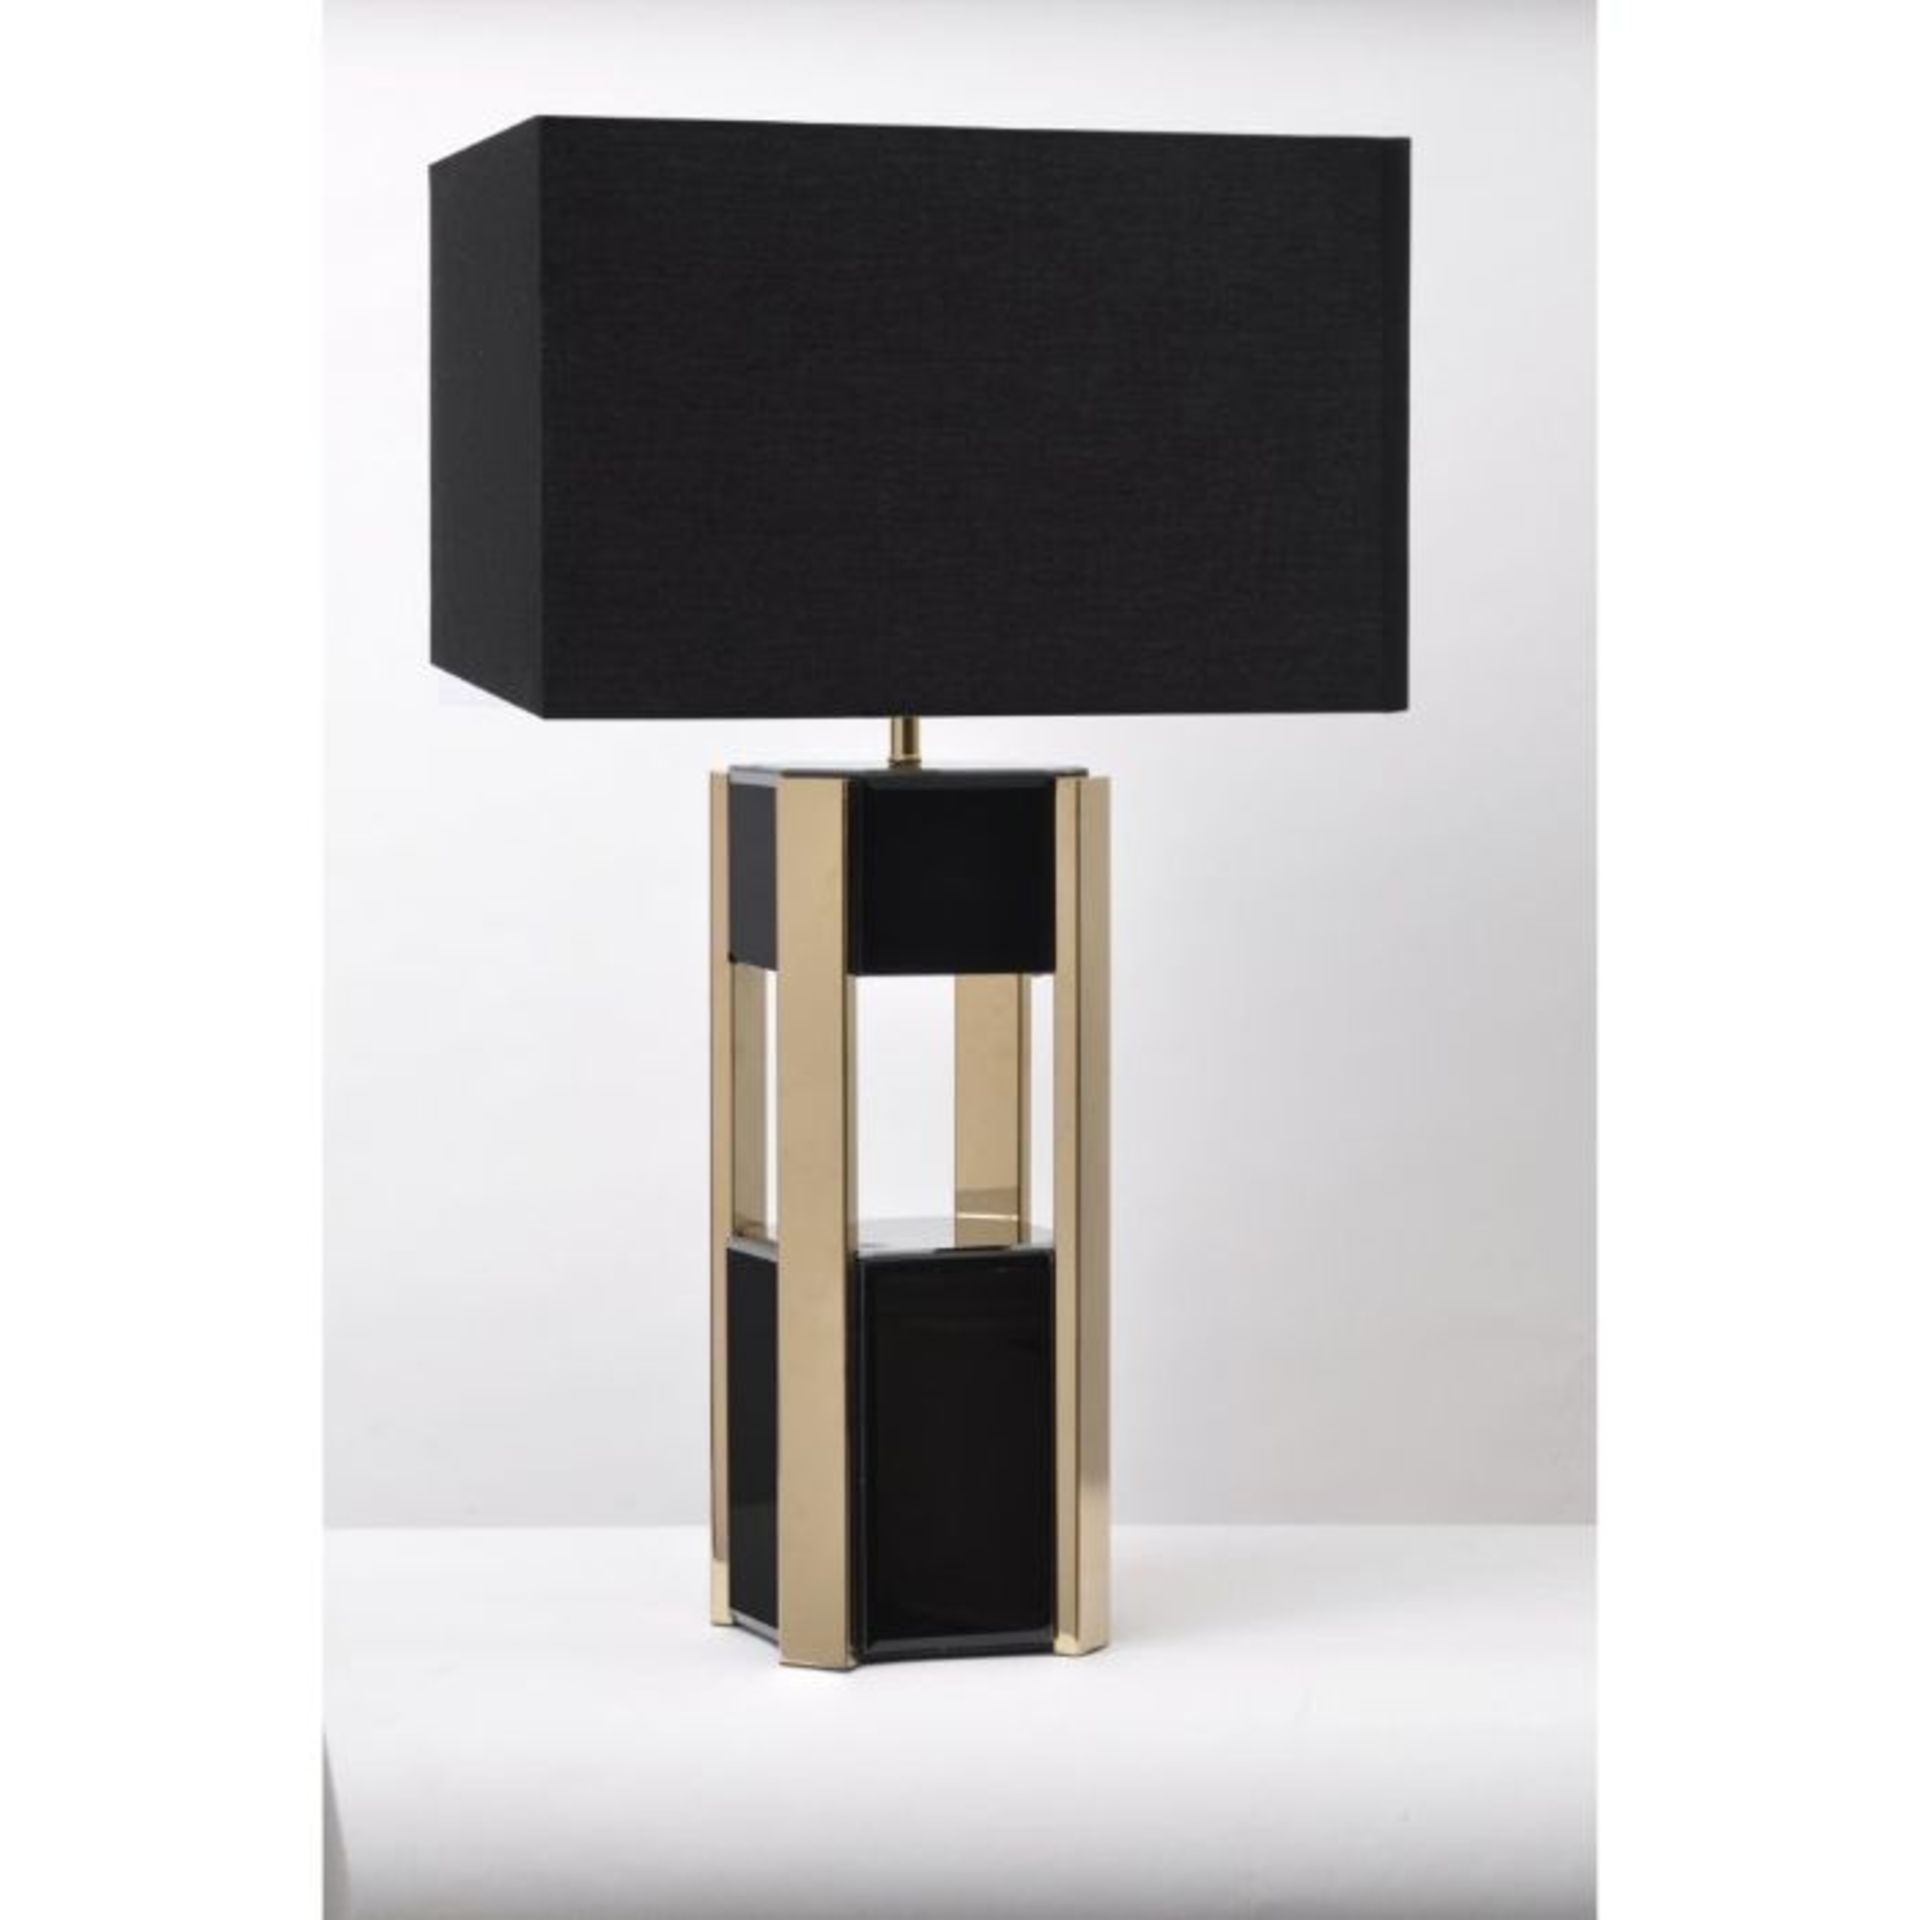 Blaise Black Glass Table Lamp Square Shade (BLACK) (40cm) (SHADE ONLY NO BASE INCLUDED) (461/3 -